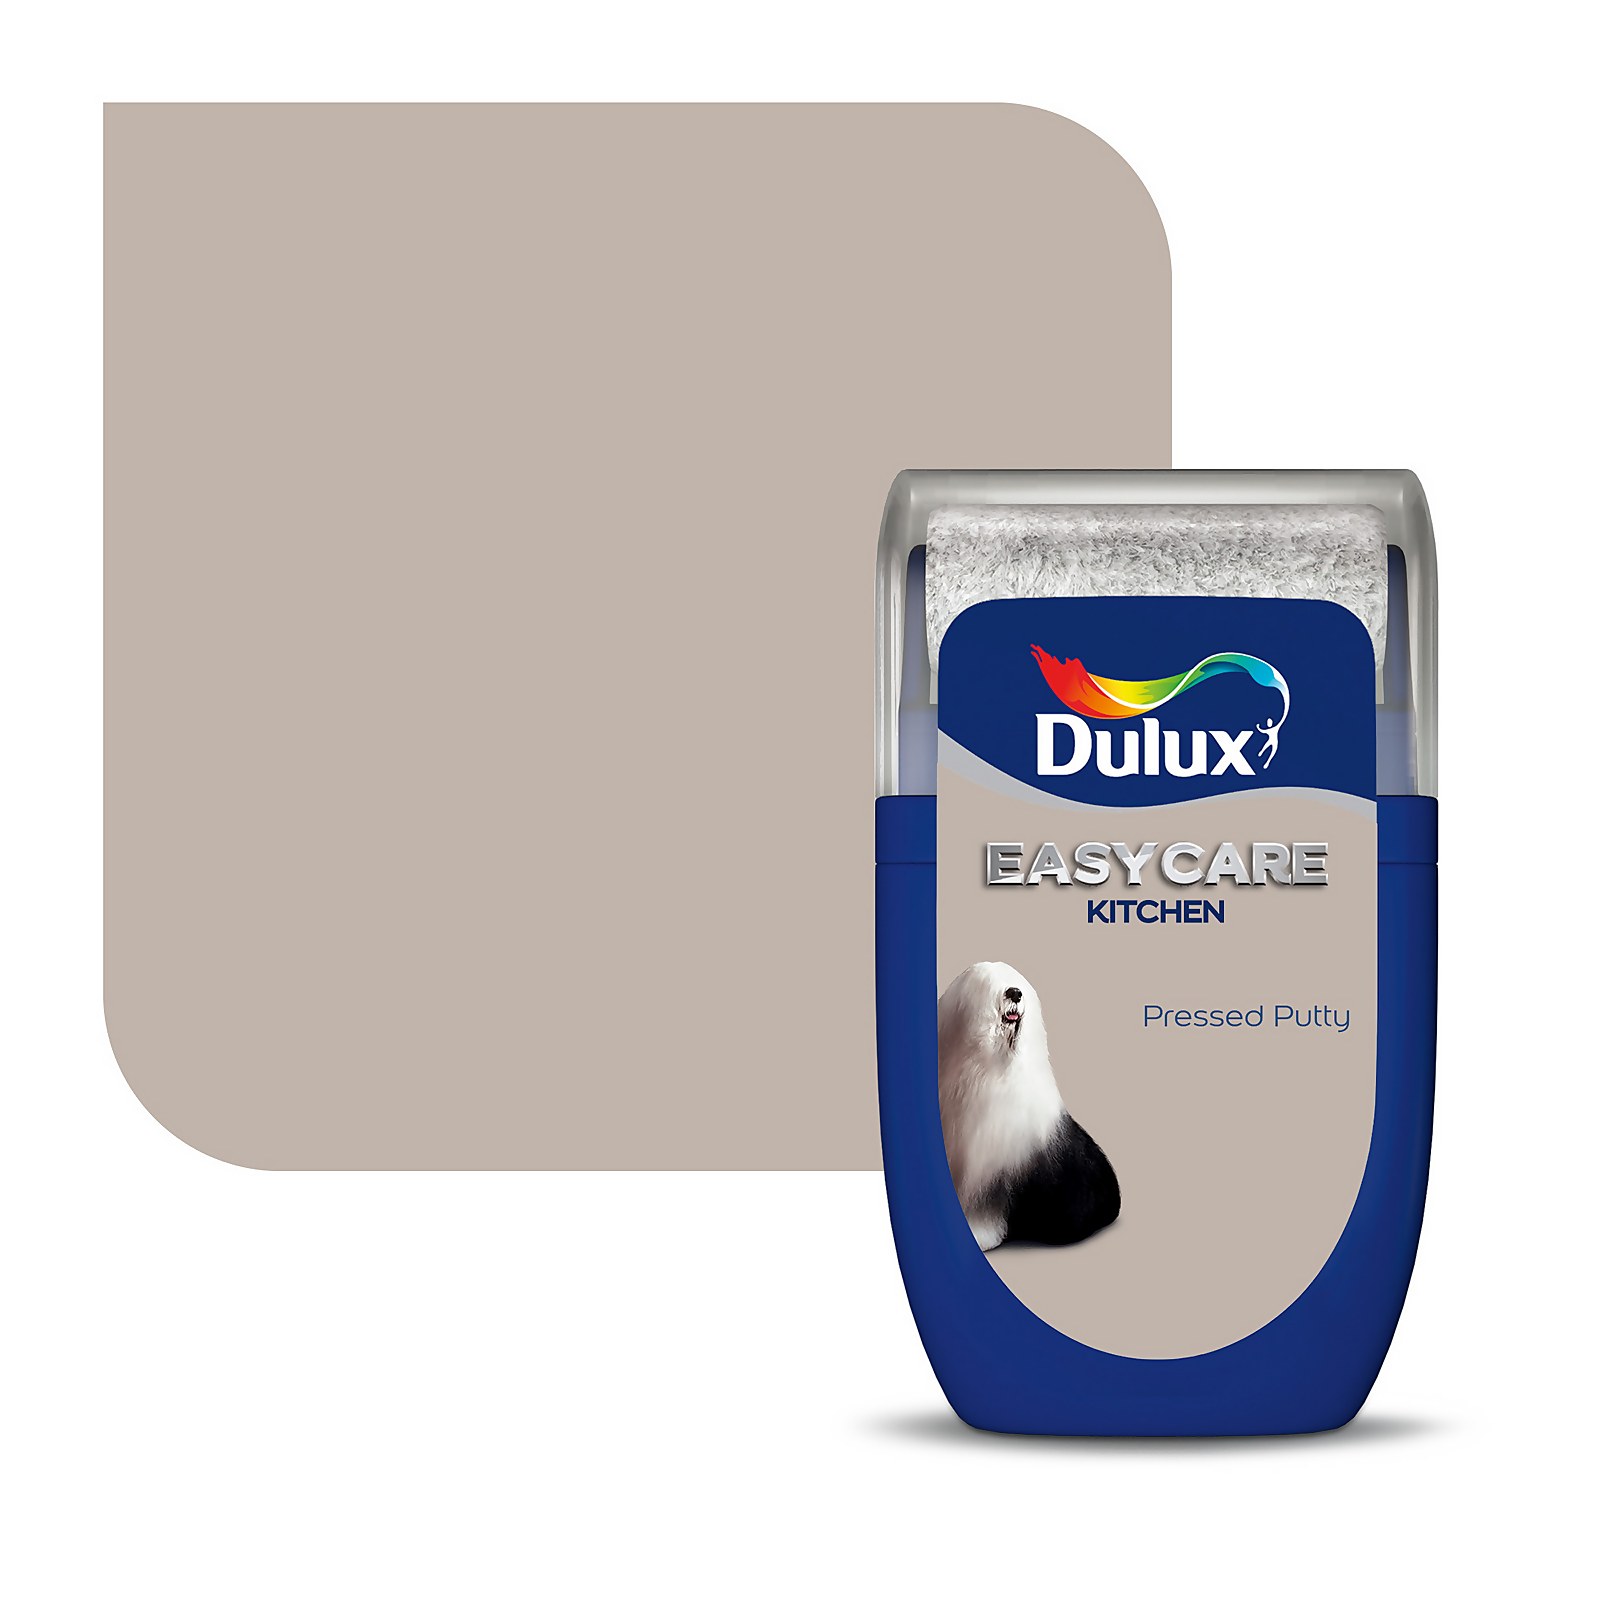 Dulux Easycare Kitchen Paint Pressed Putty - Tester 30ml